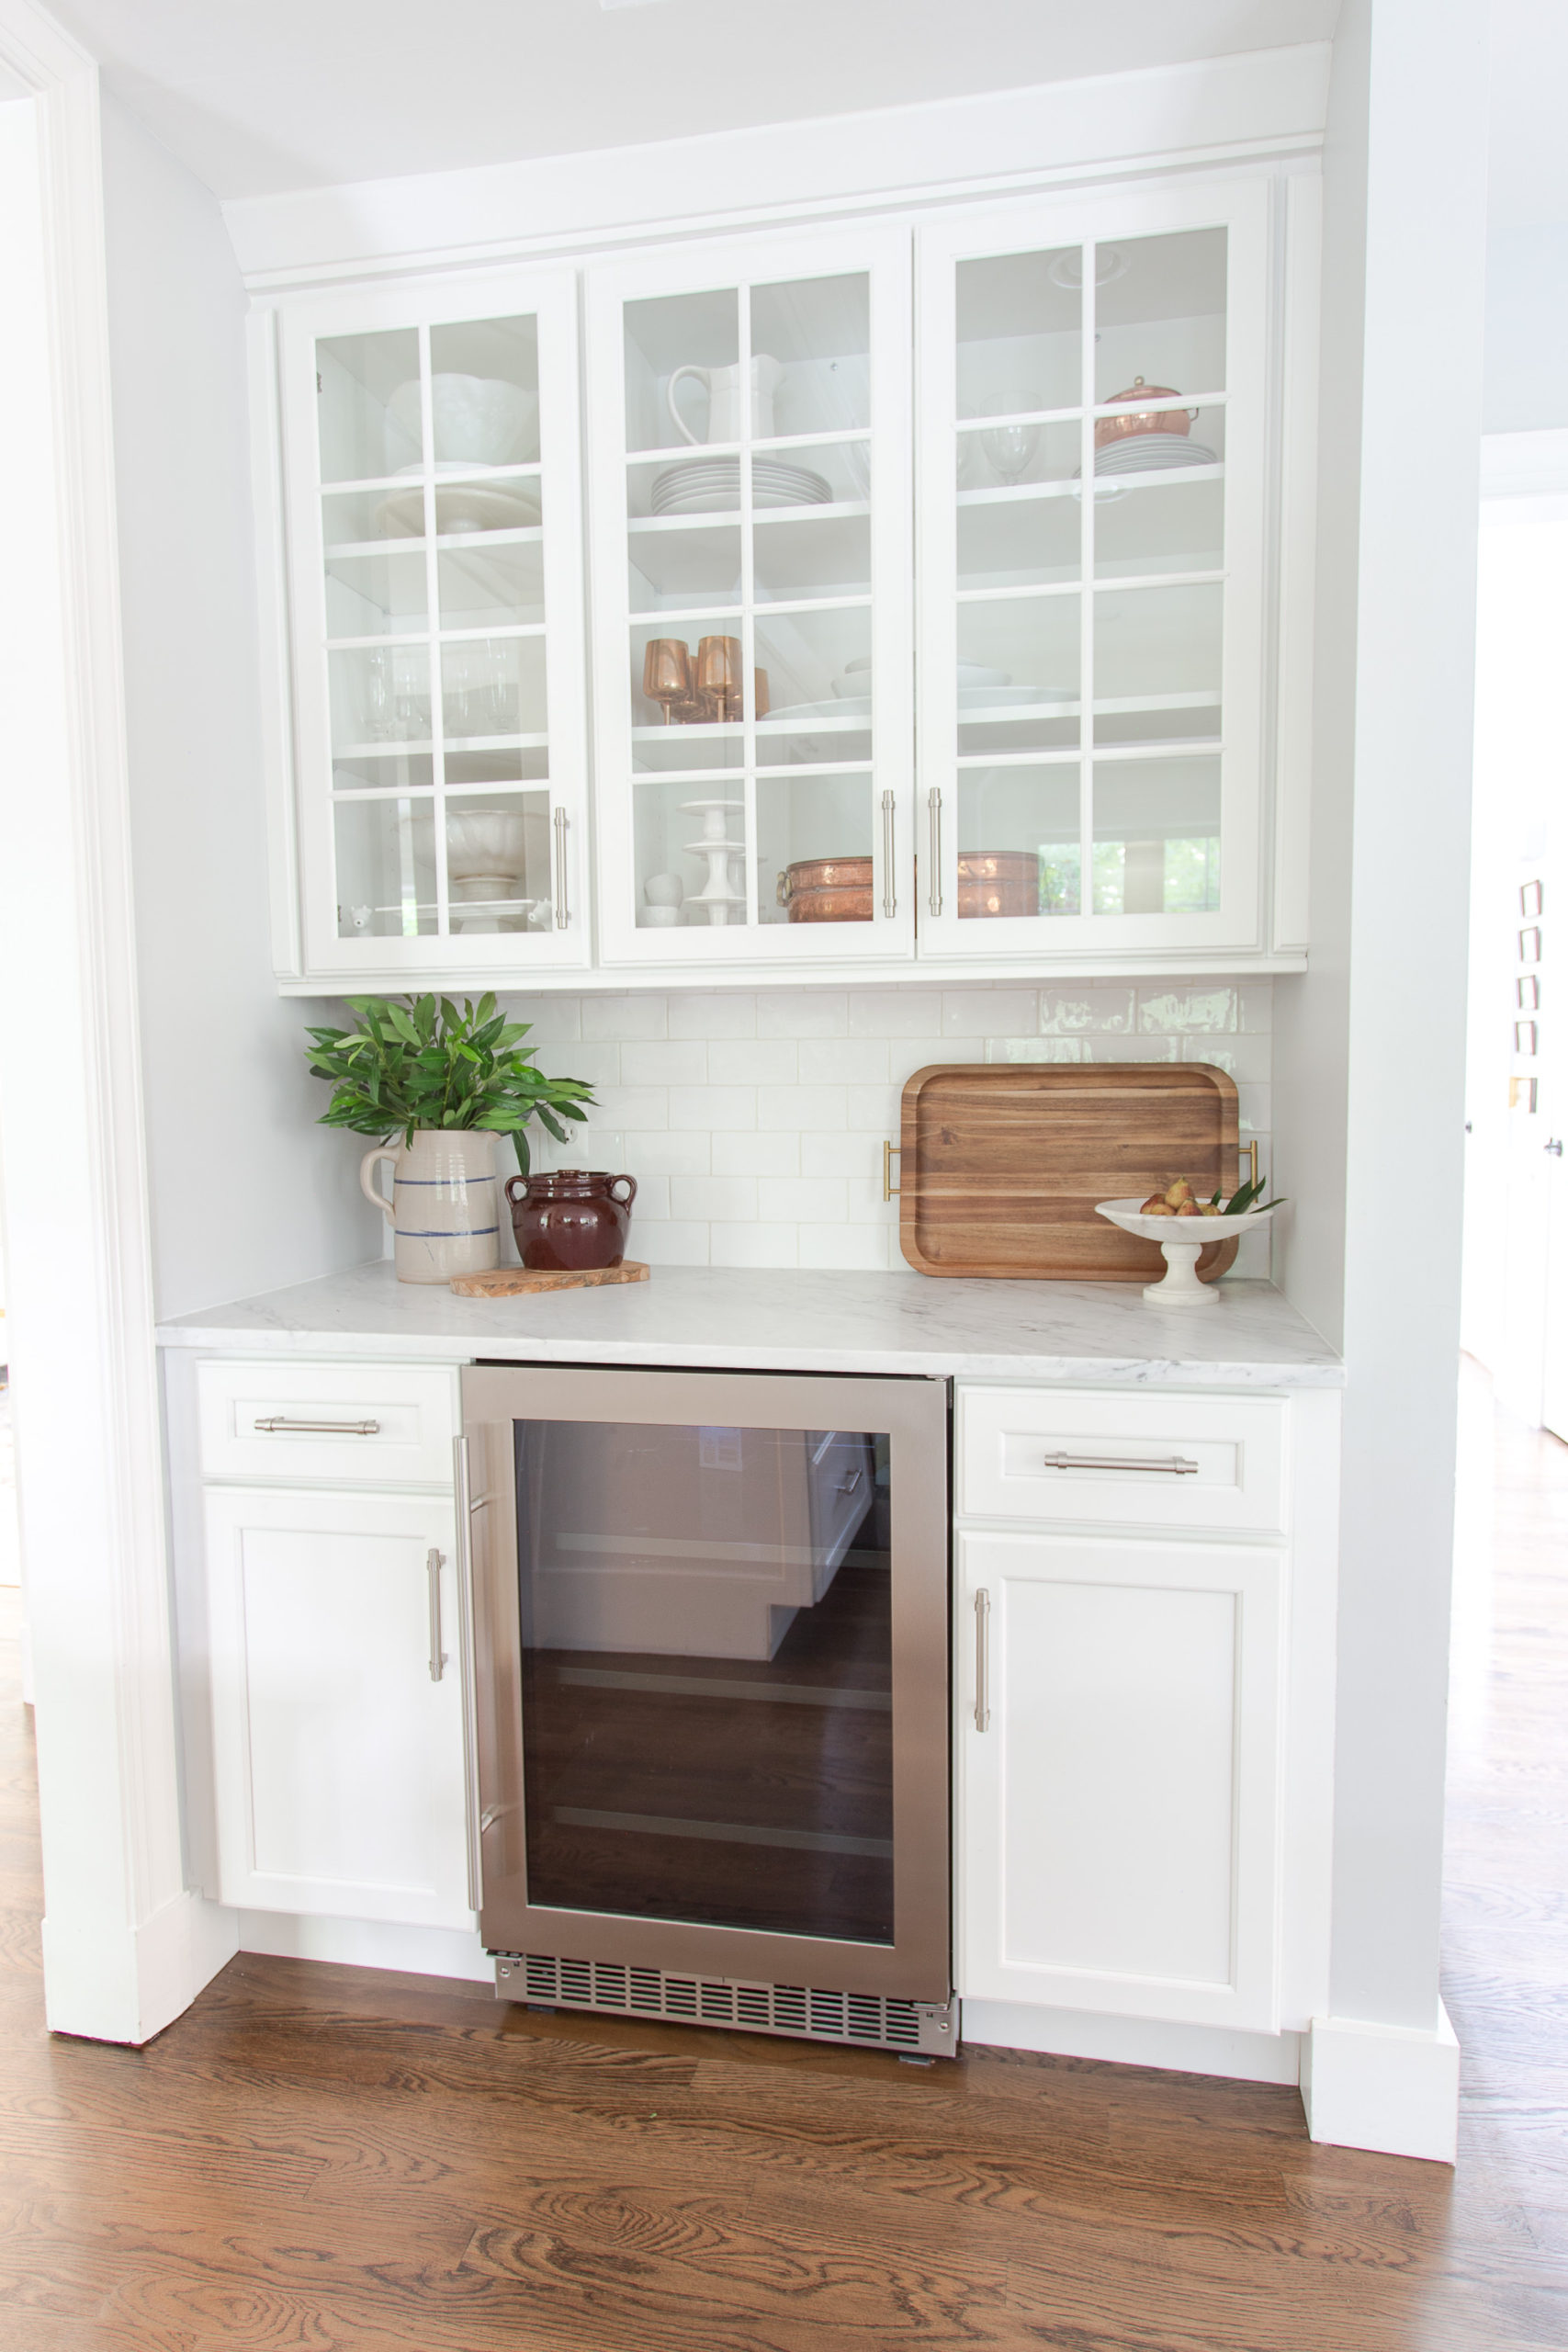 mini fridge in cabinets of a white kitchen with marble countertops